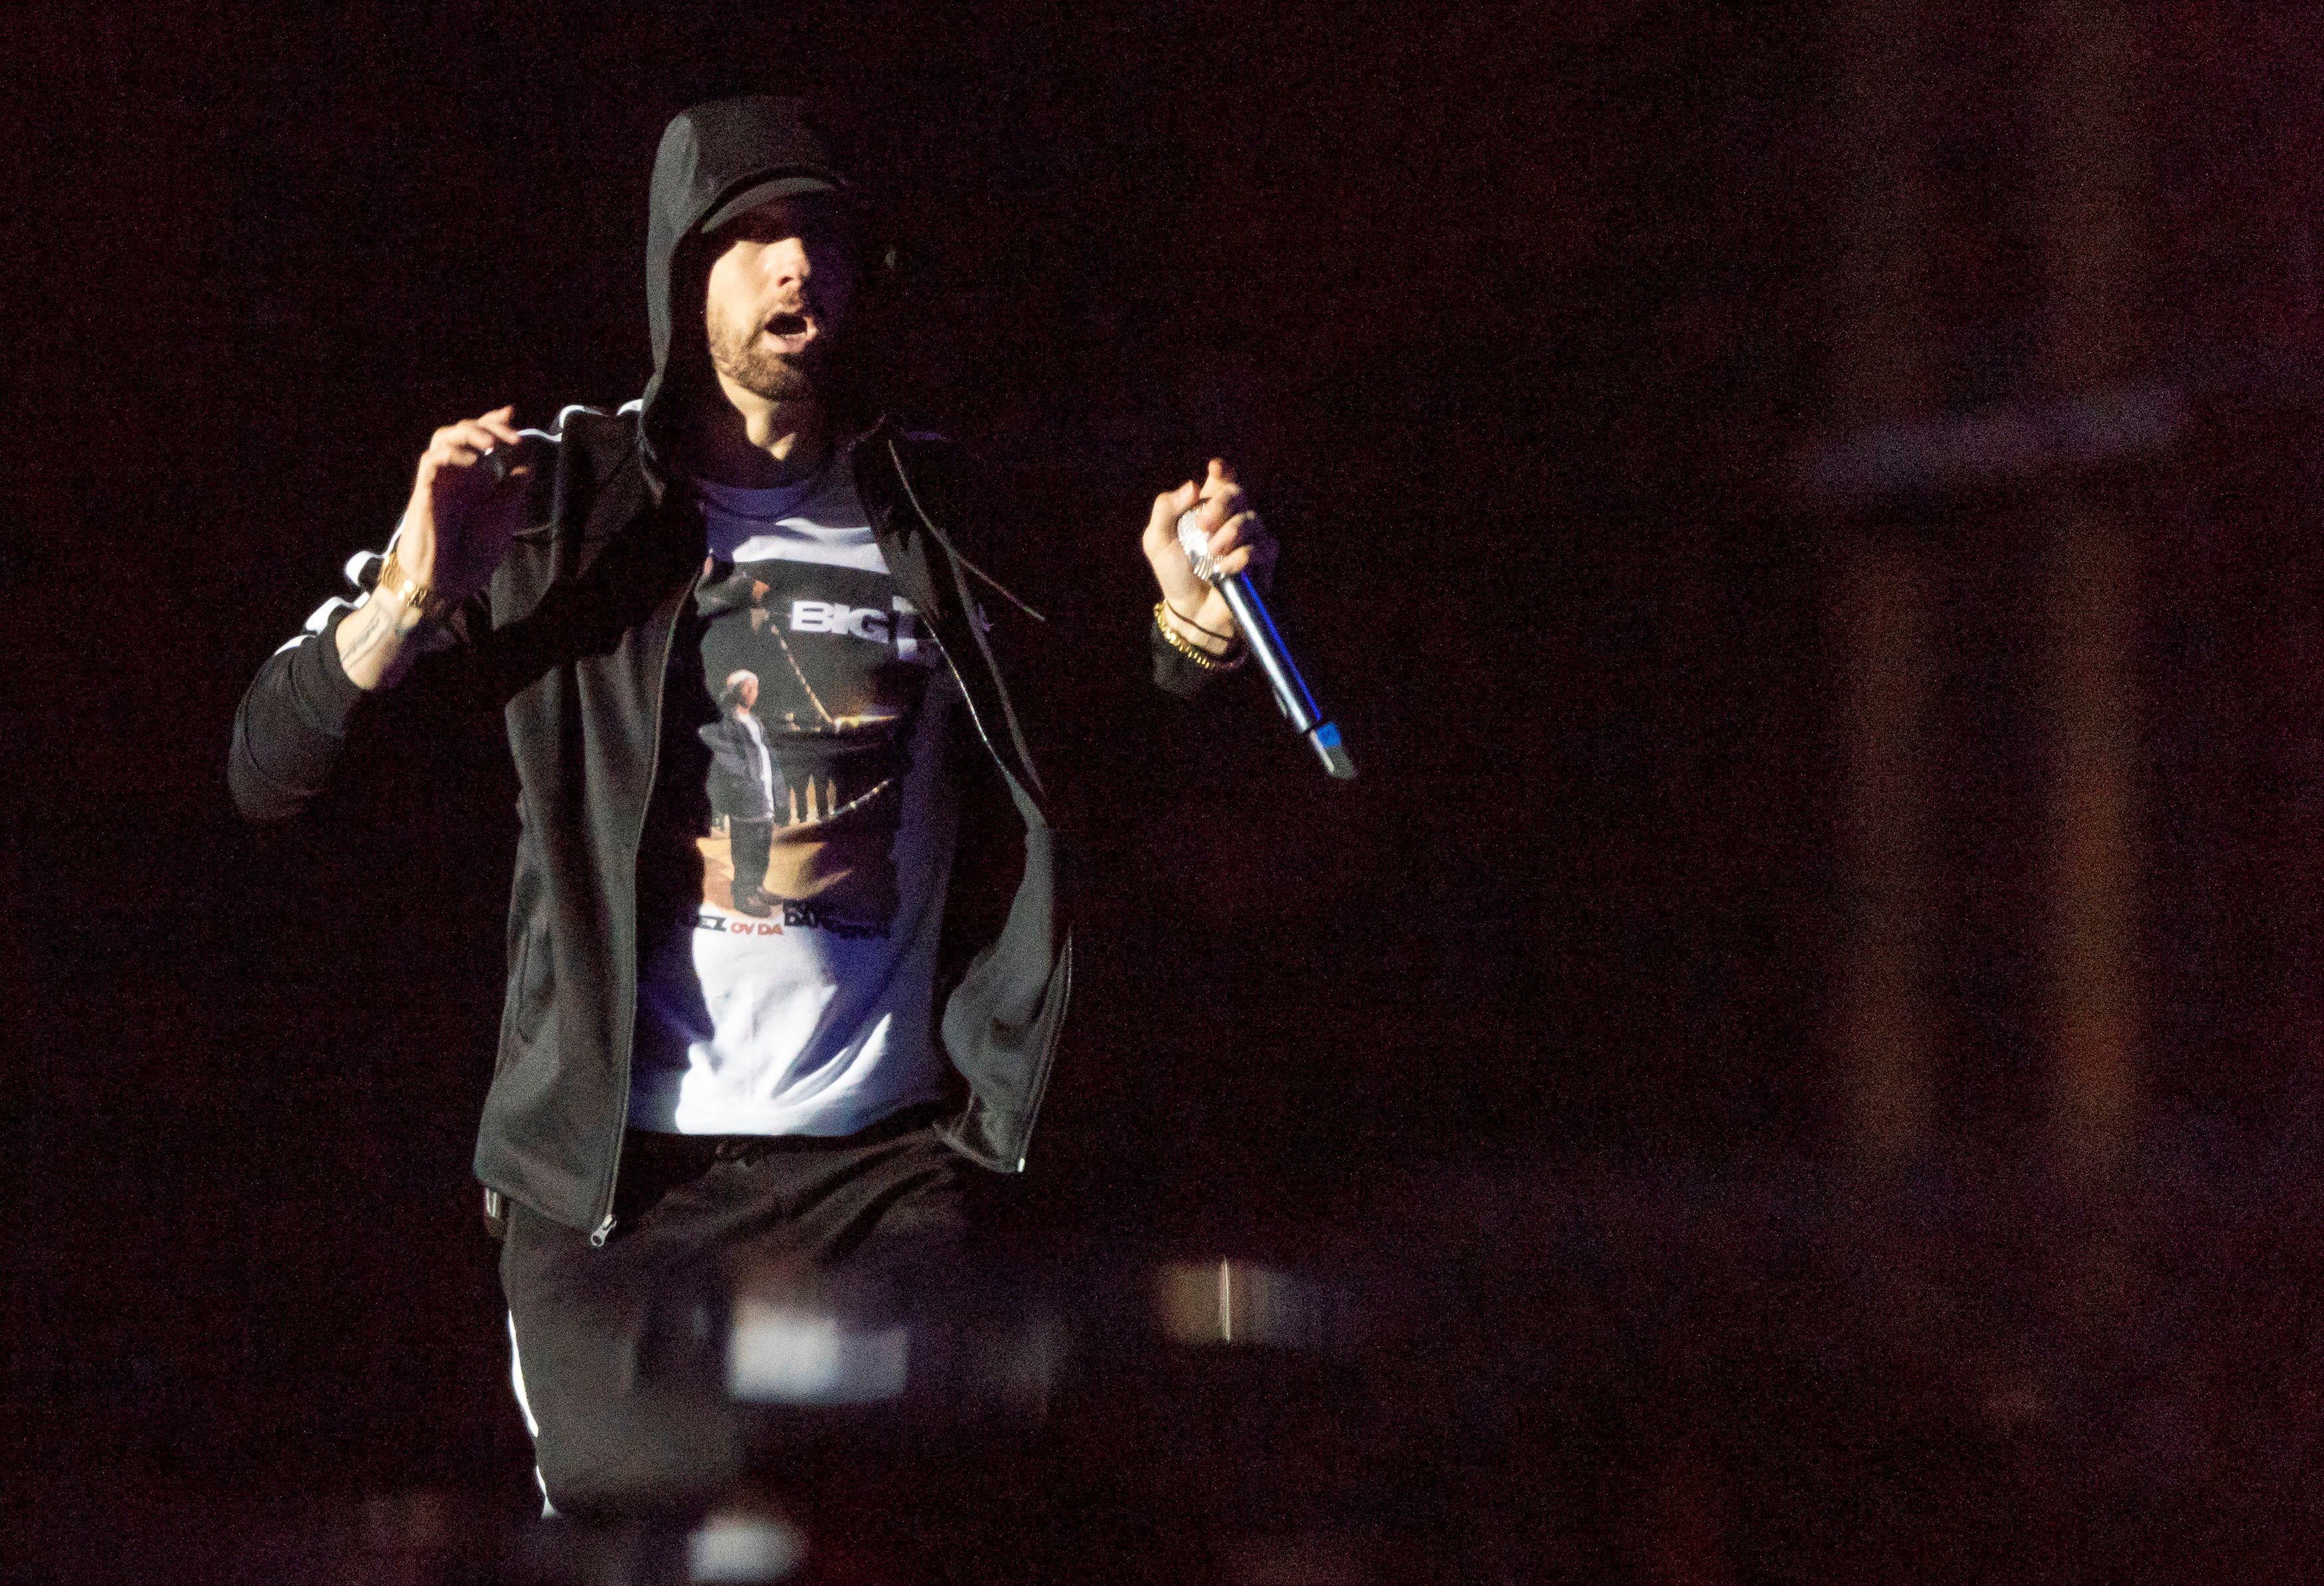 Eminem confronted home intruder who slipped past security - Yahoo Entertainment